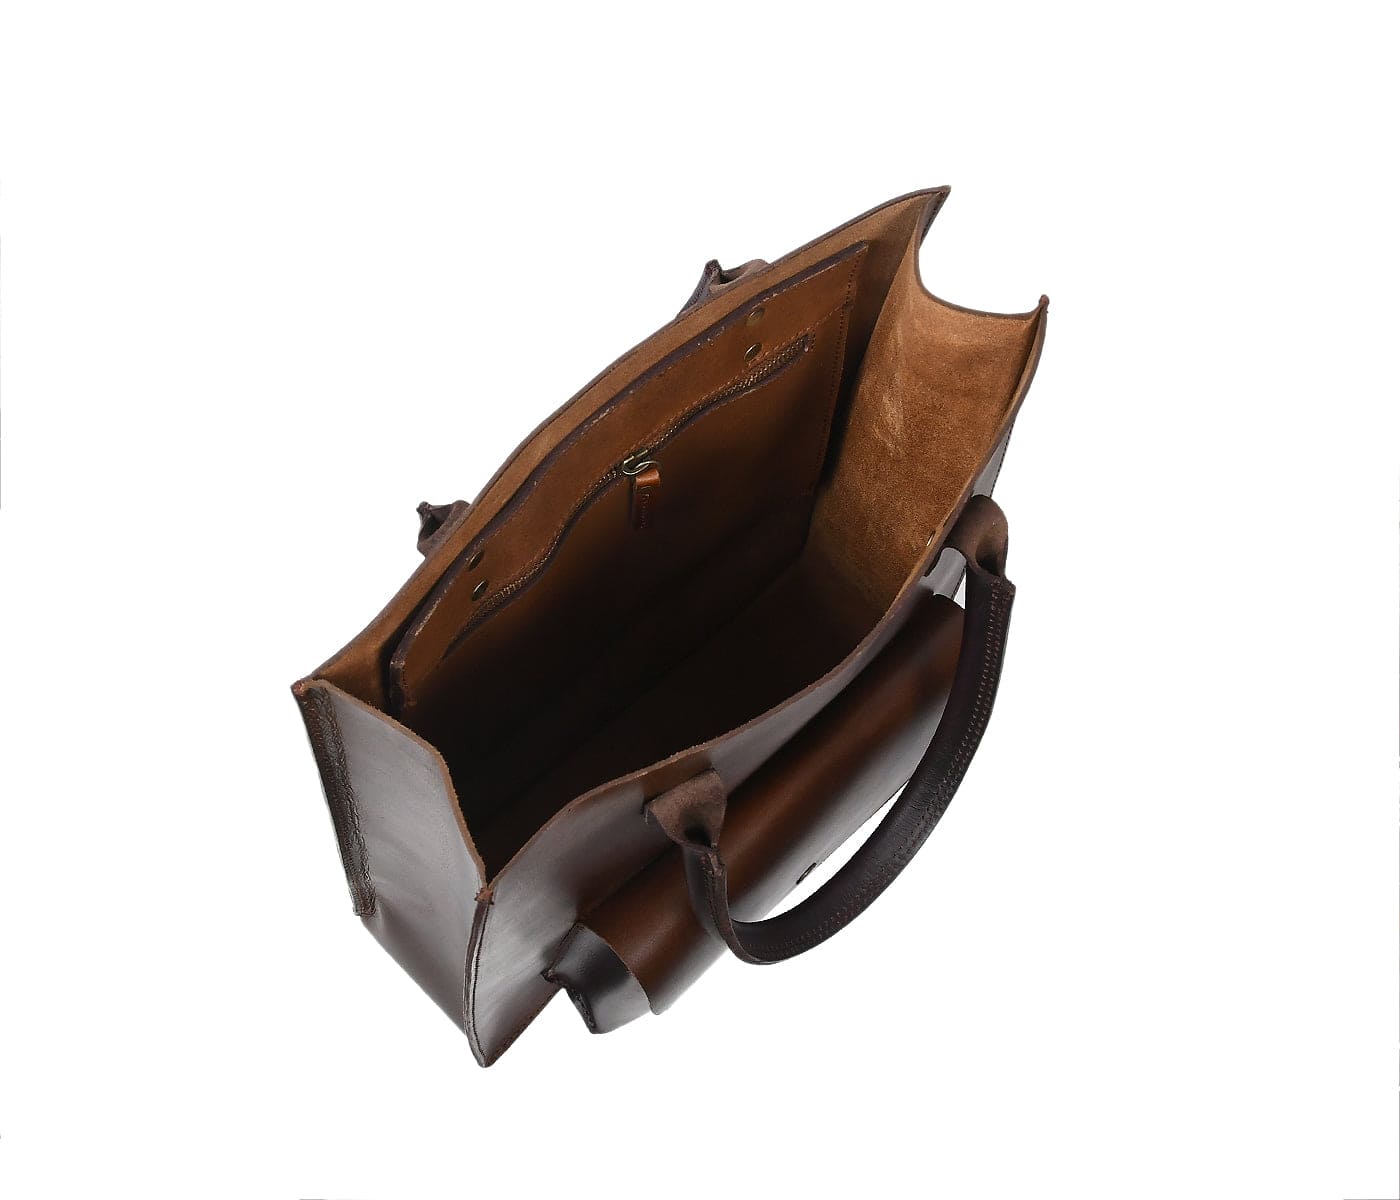 Elegance in Brown: Discover Our Exquisite Brown Leather Shopper Bag. - CELTICINDIA